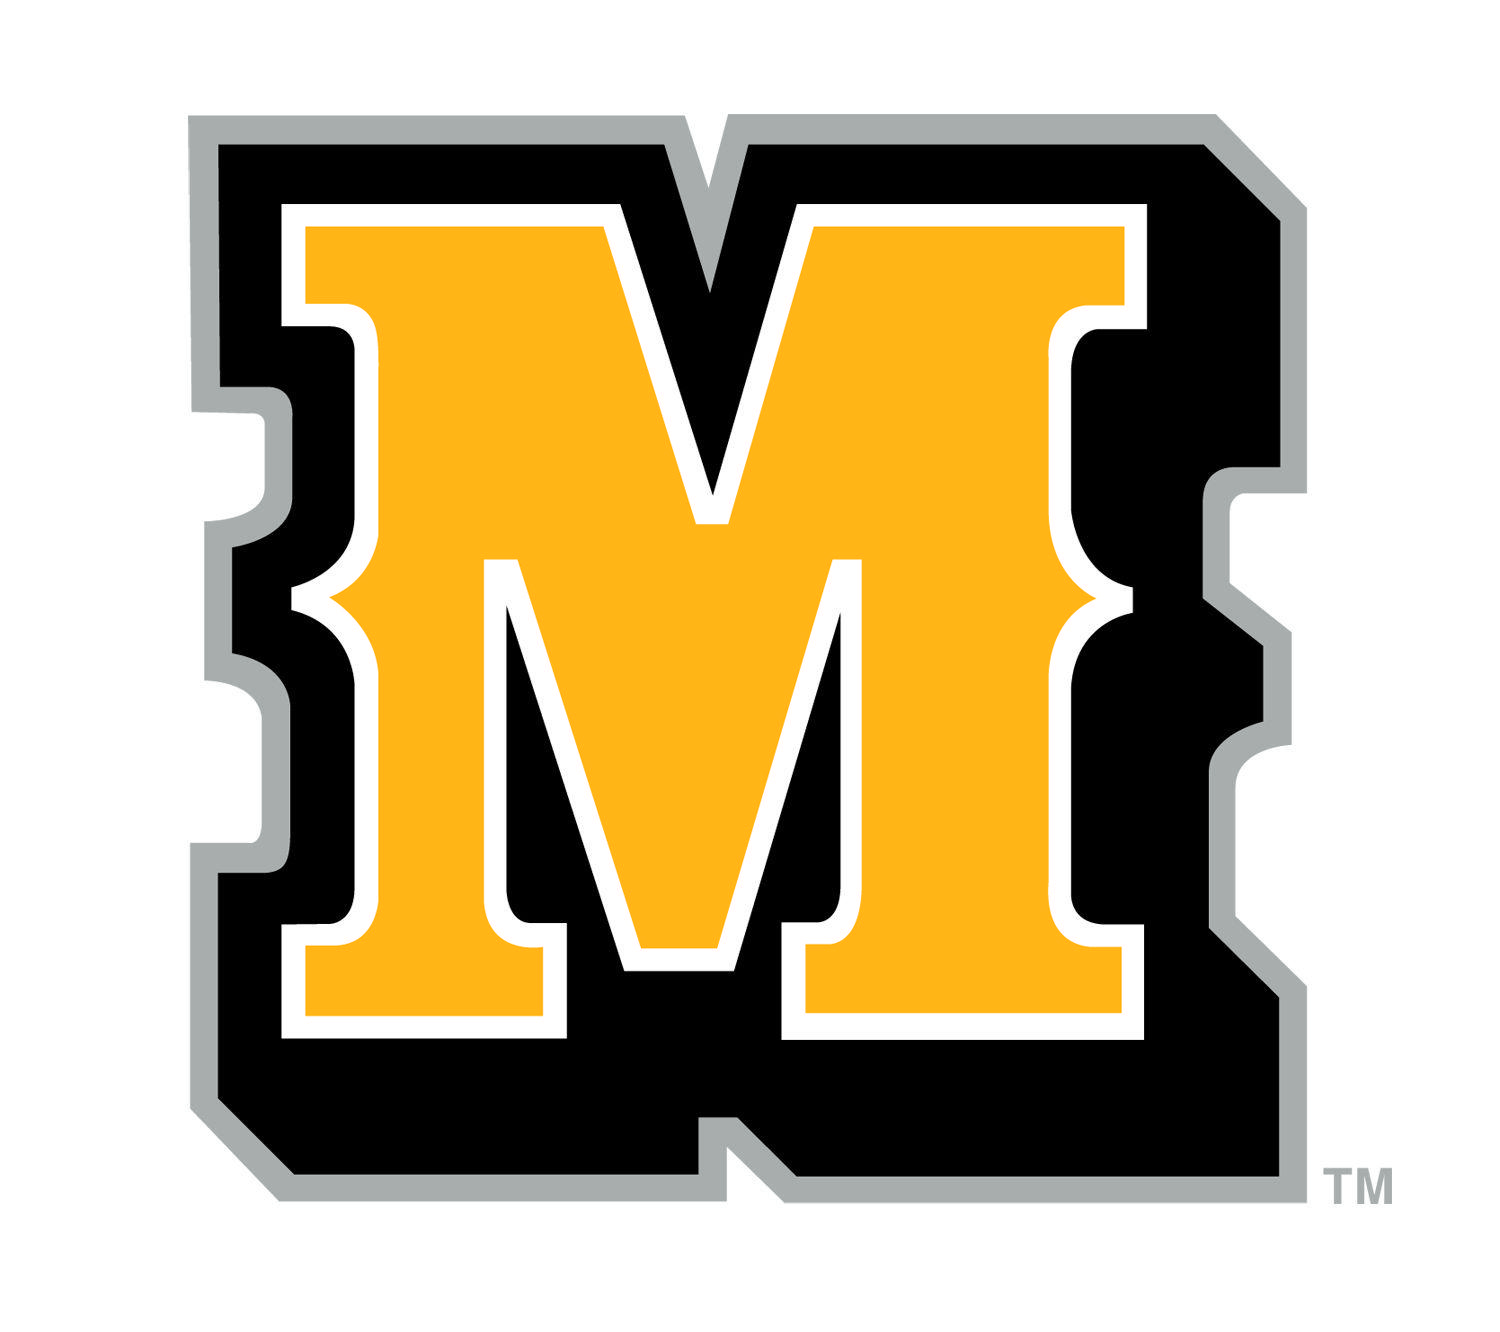 Baseball M Logo - Our New Madisonville Miner Logos Are Here!. Madisonville Miners